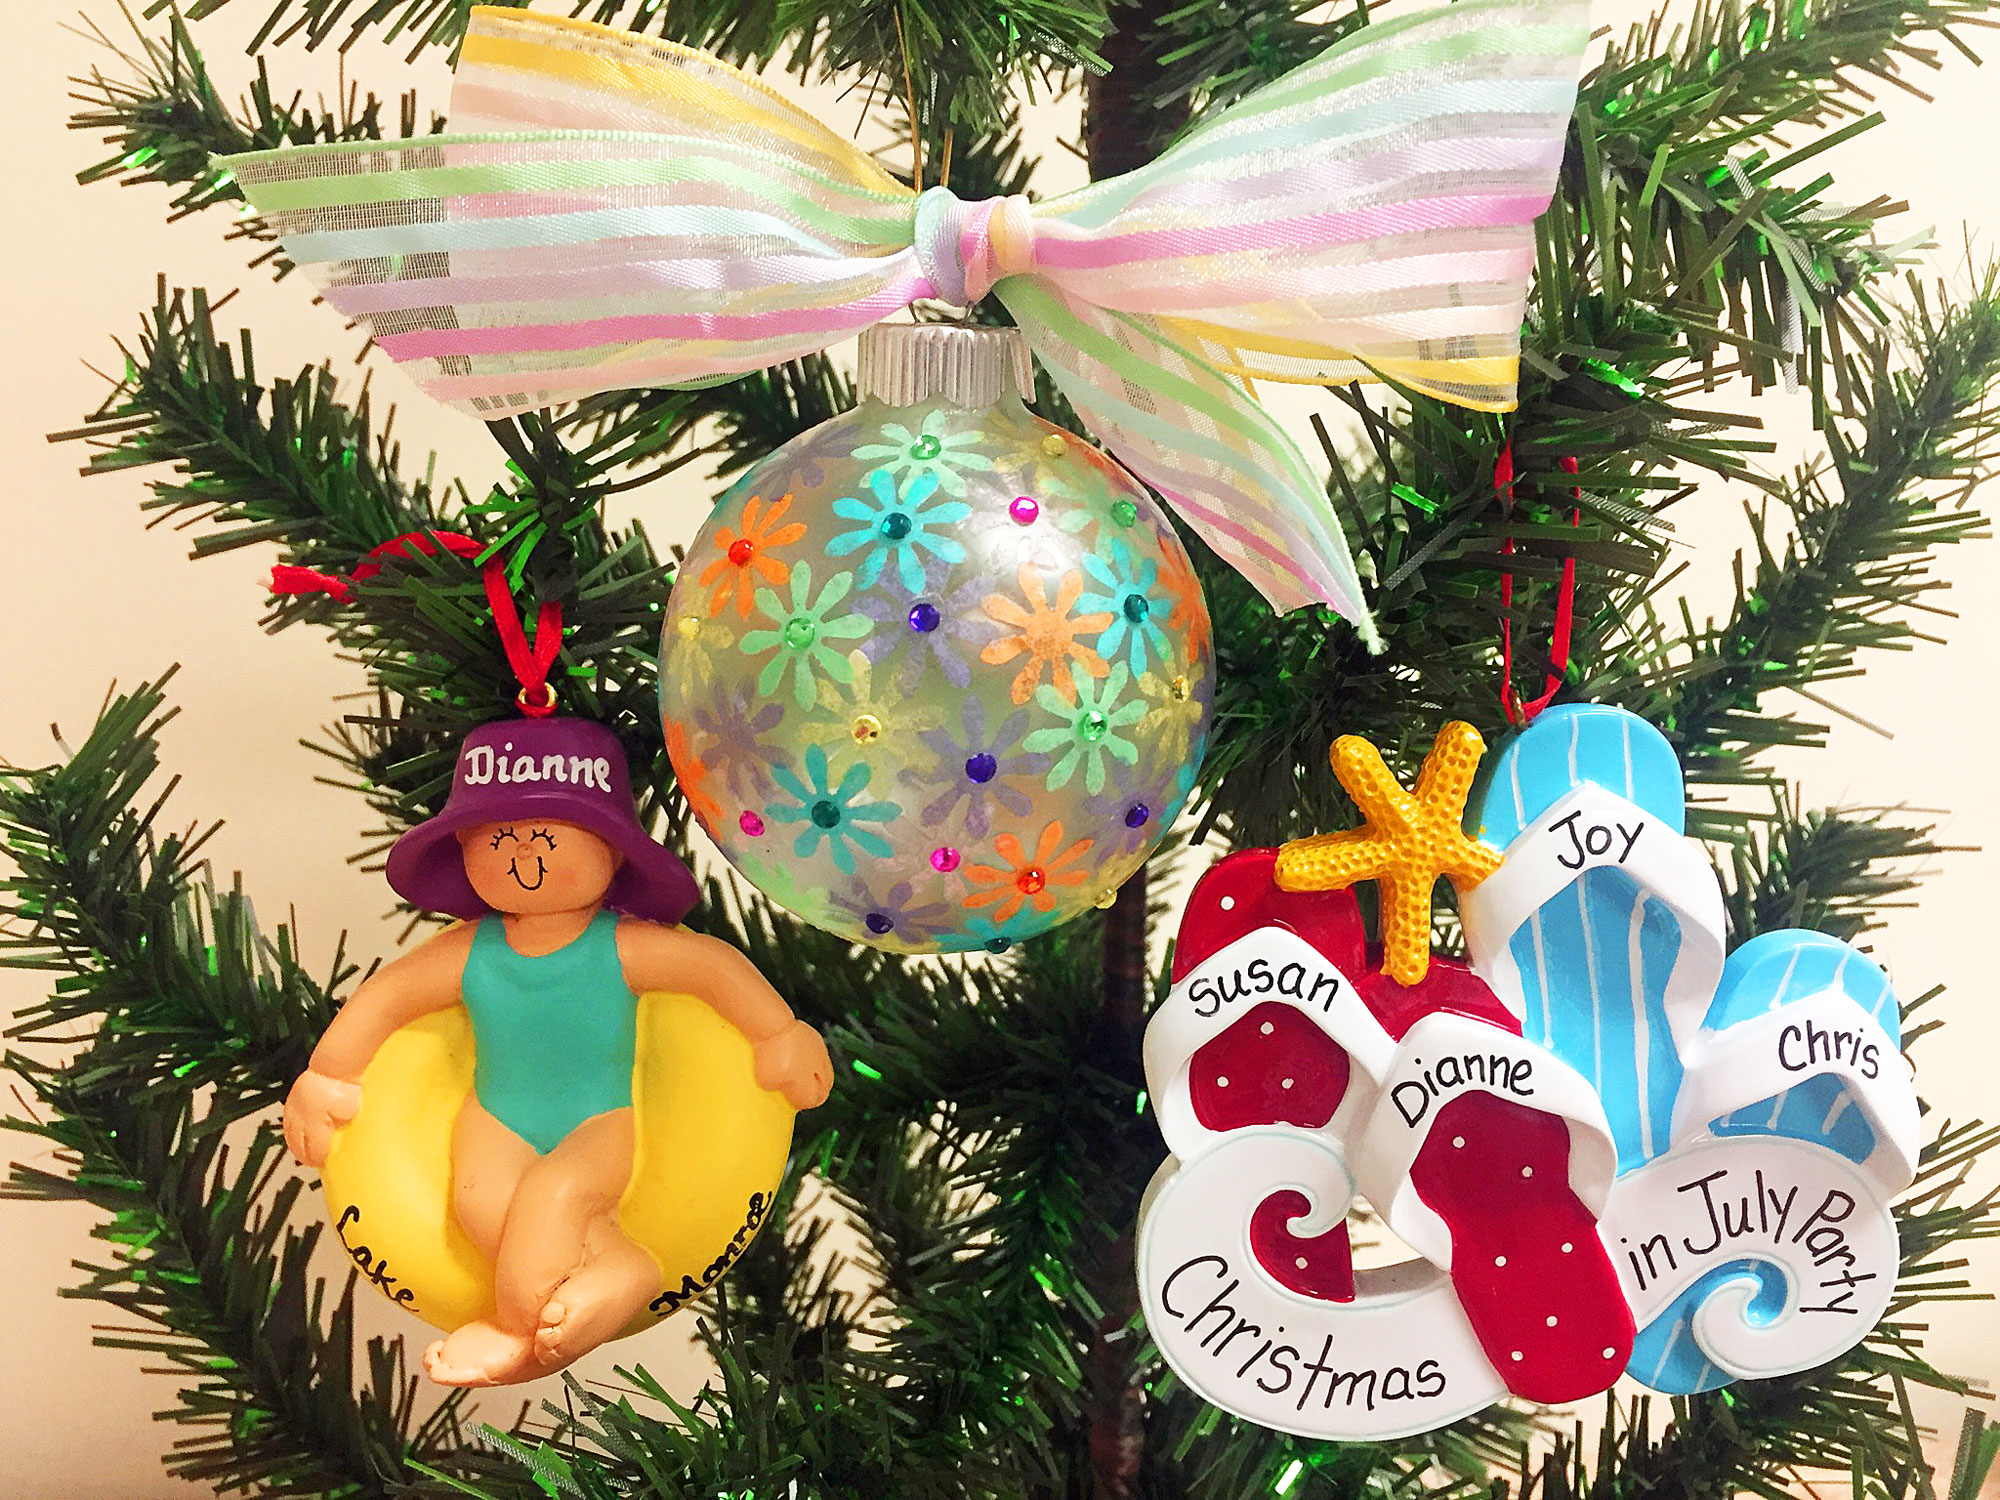 A DIY paper mache ornament, flip flop ornaments, and an ornament with a girl relaxing in an inner tube. | OrnamentShop.com